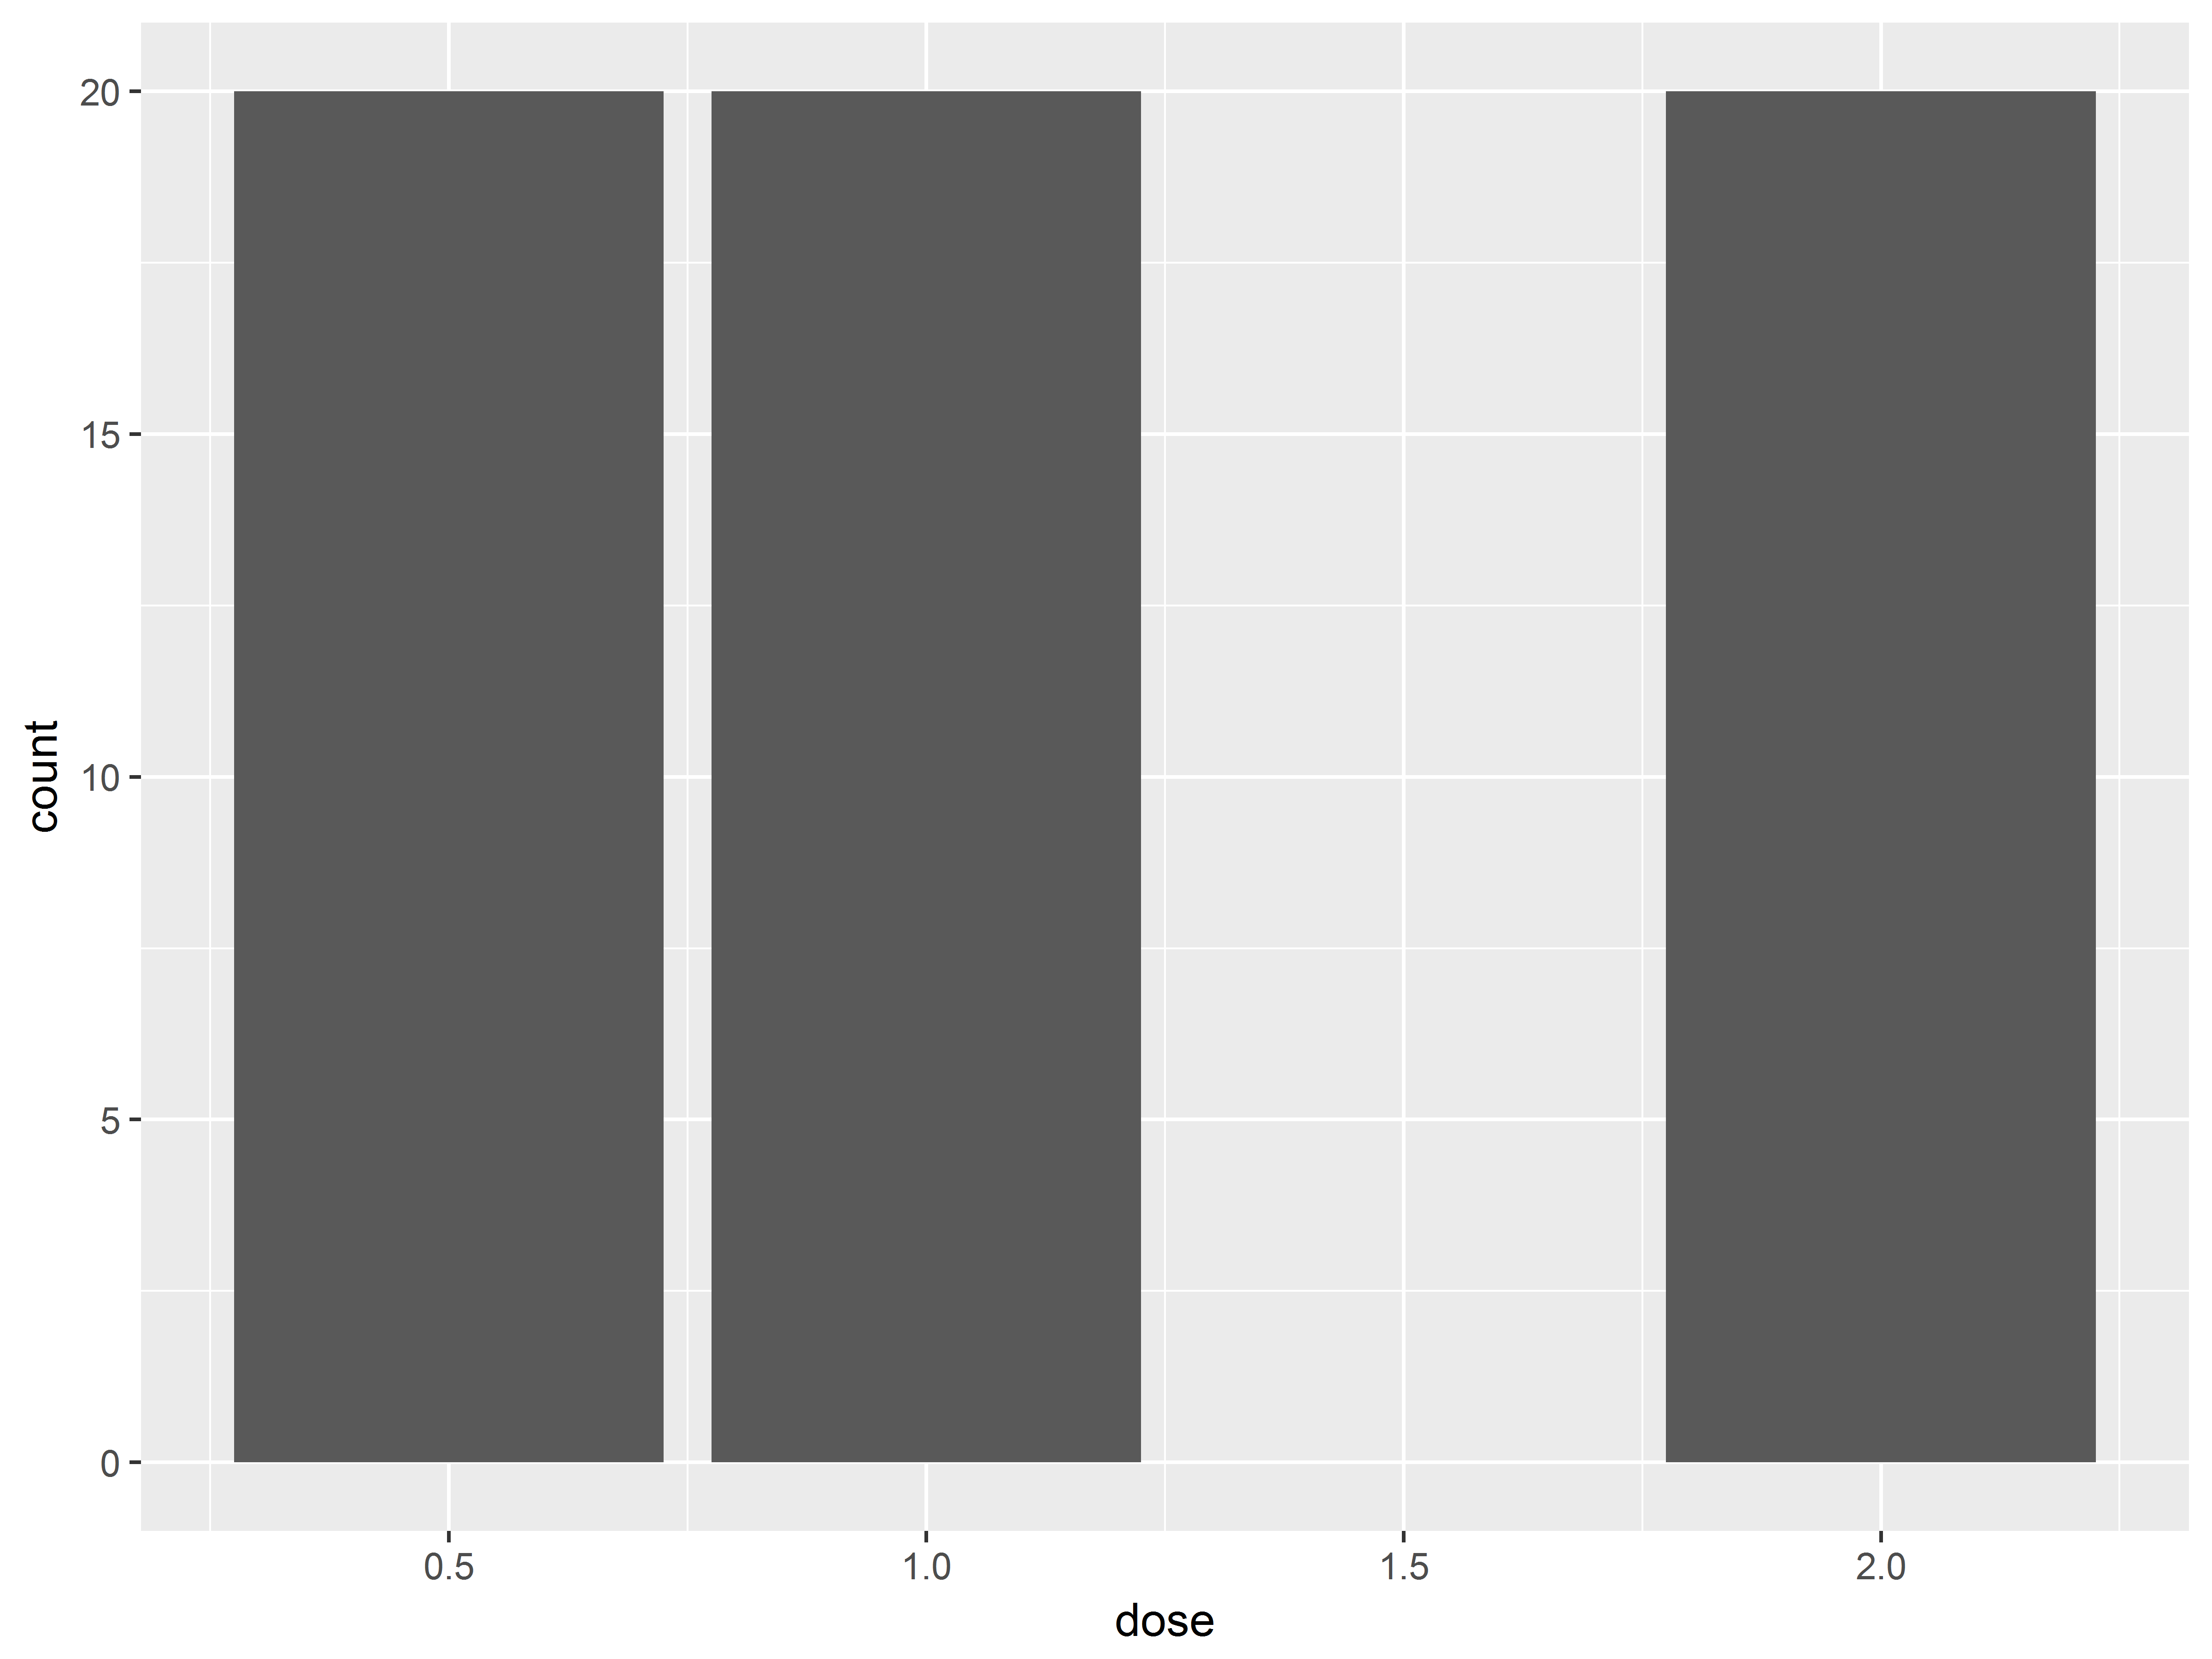 r - How to reorder boxplot in a specific order with interactions in ggplot2  - Stack Overflow